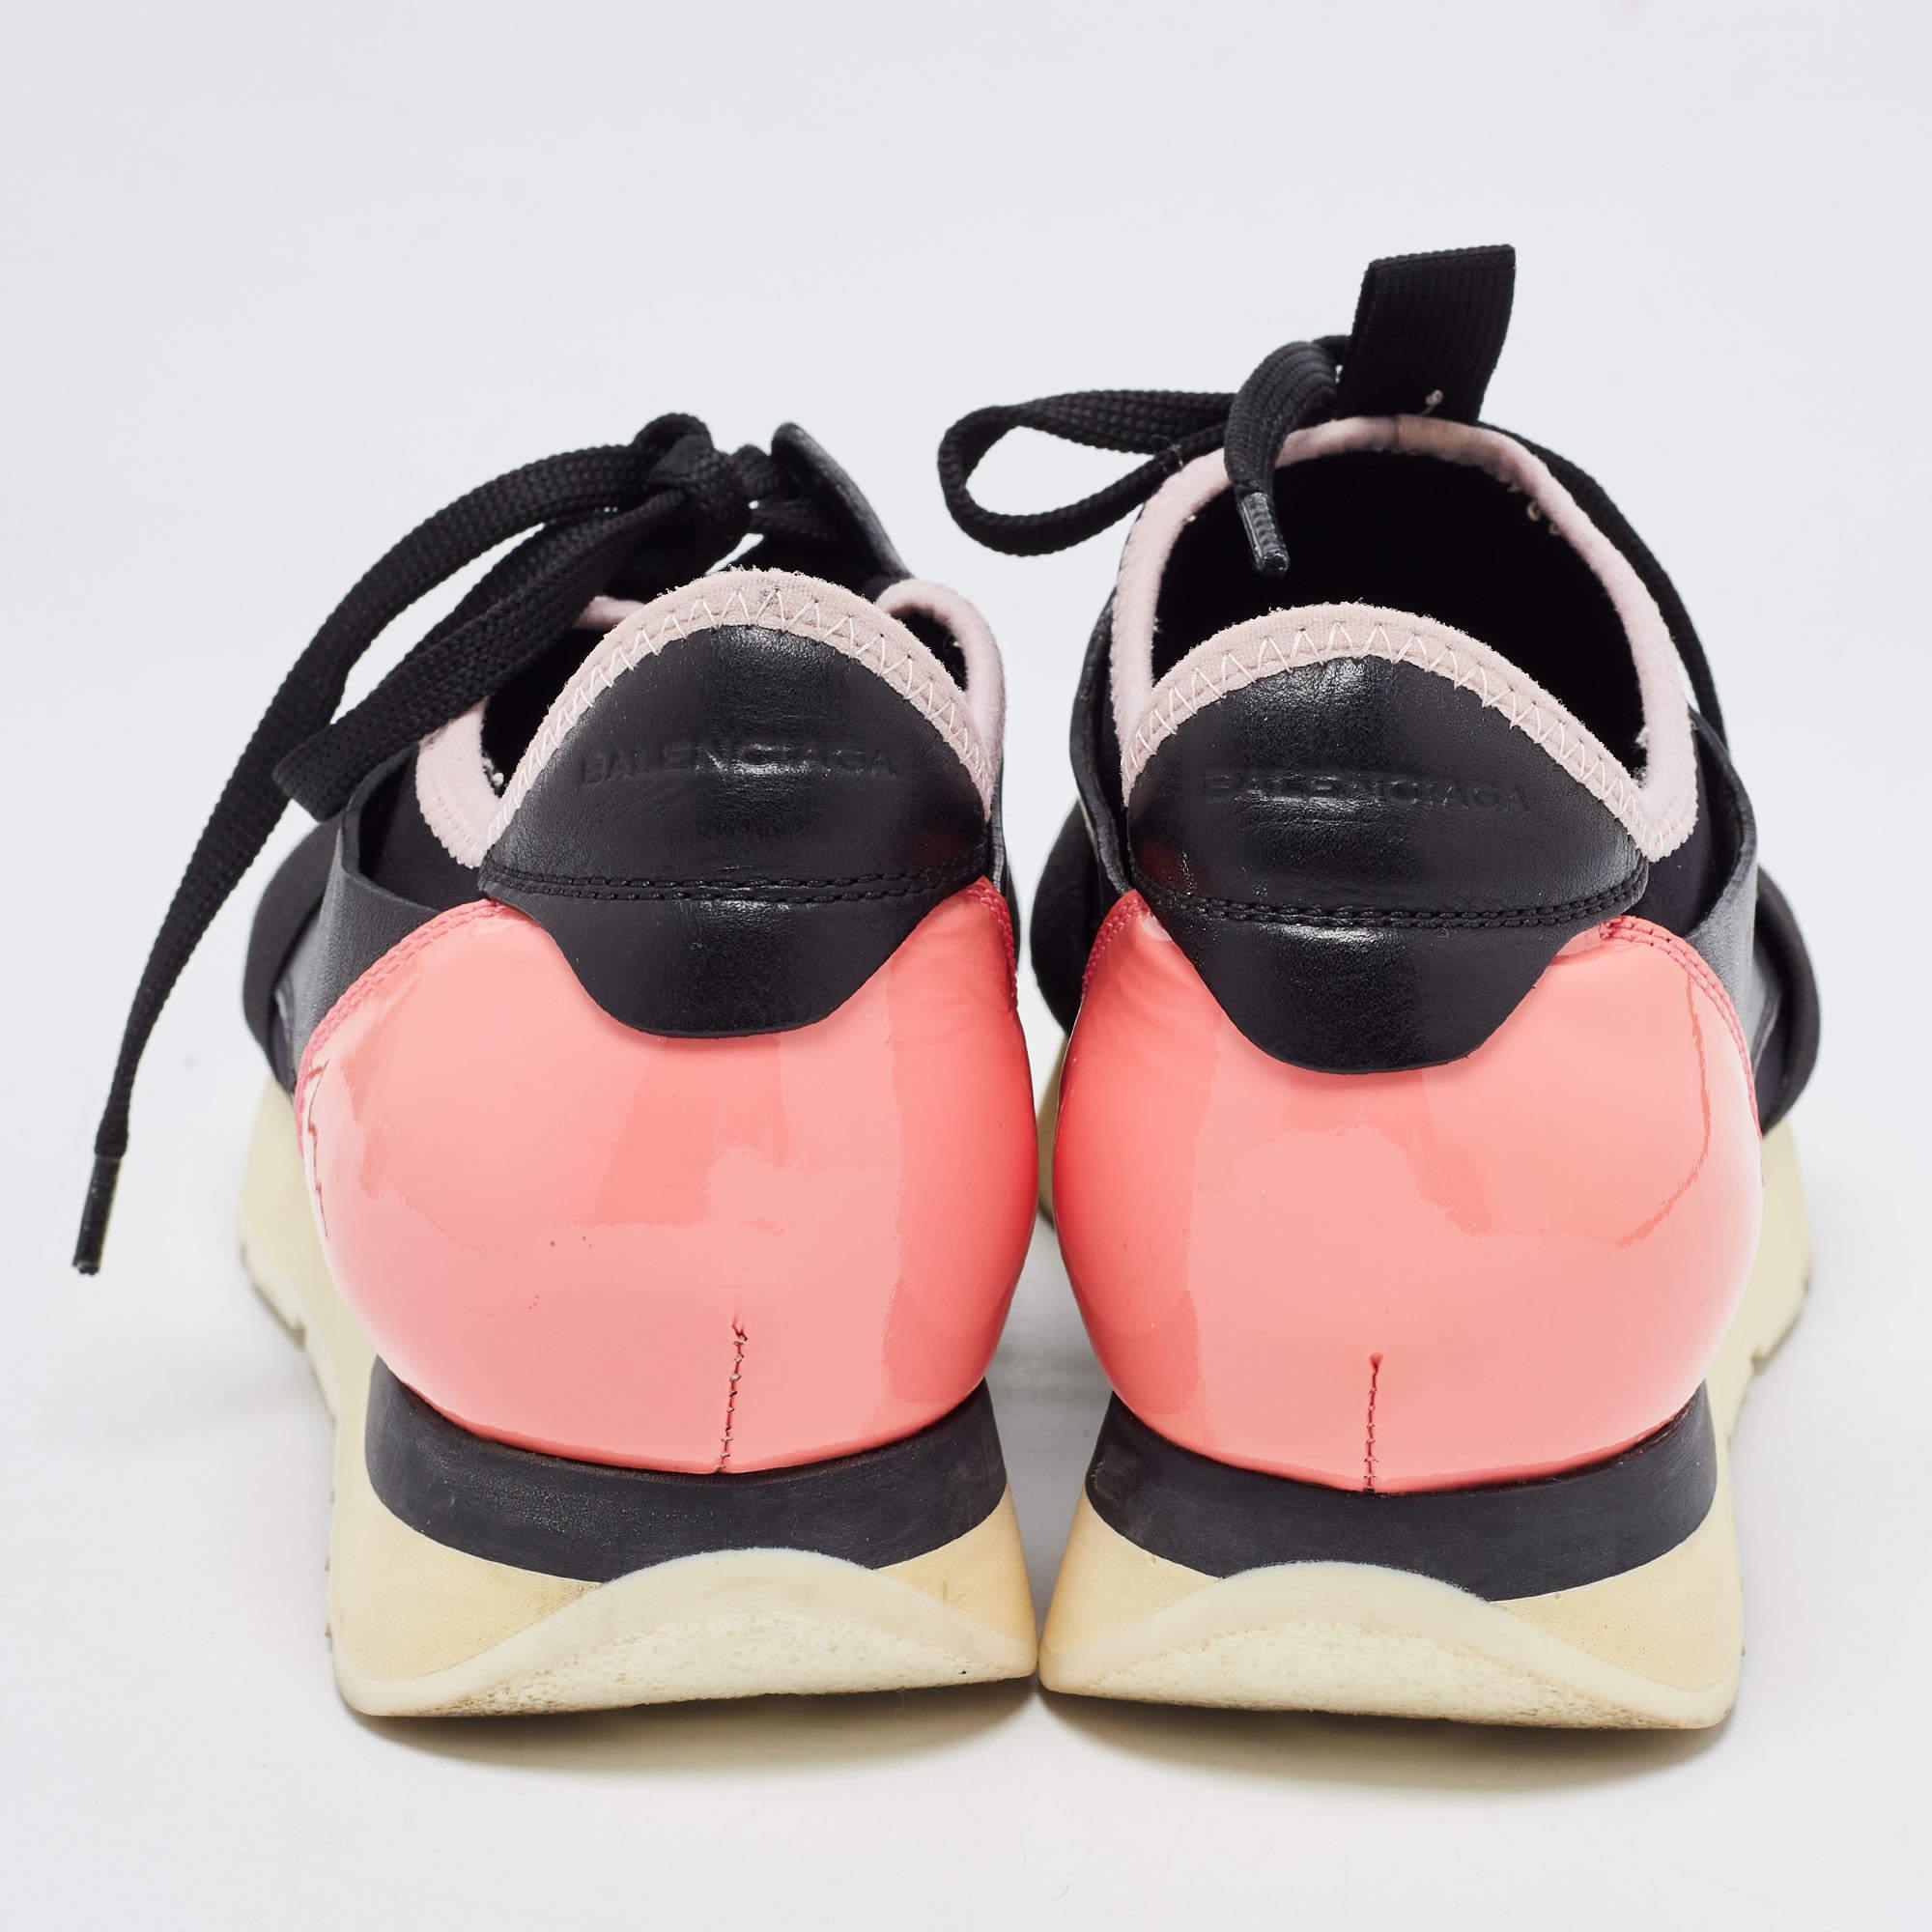 Balenciaga Black/Pink Leather and Mesh Race Runner Sneakers Size 37 In Good Condition For Sale In Dubai, Al Qouz 2